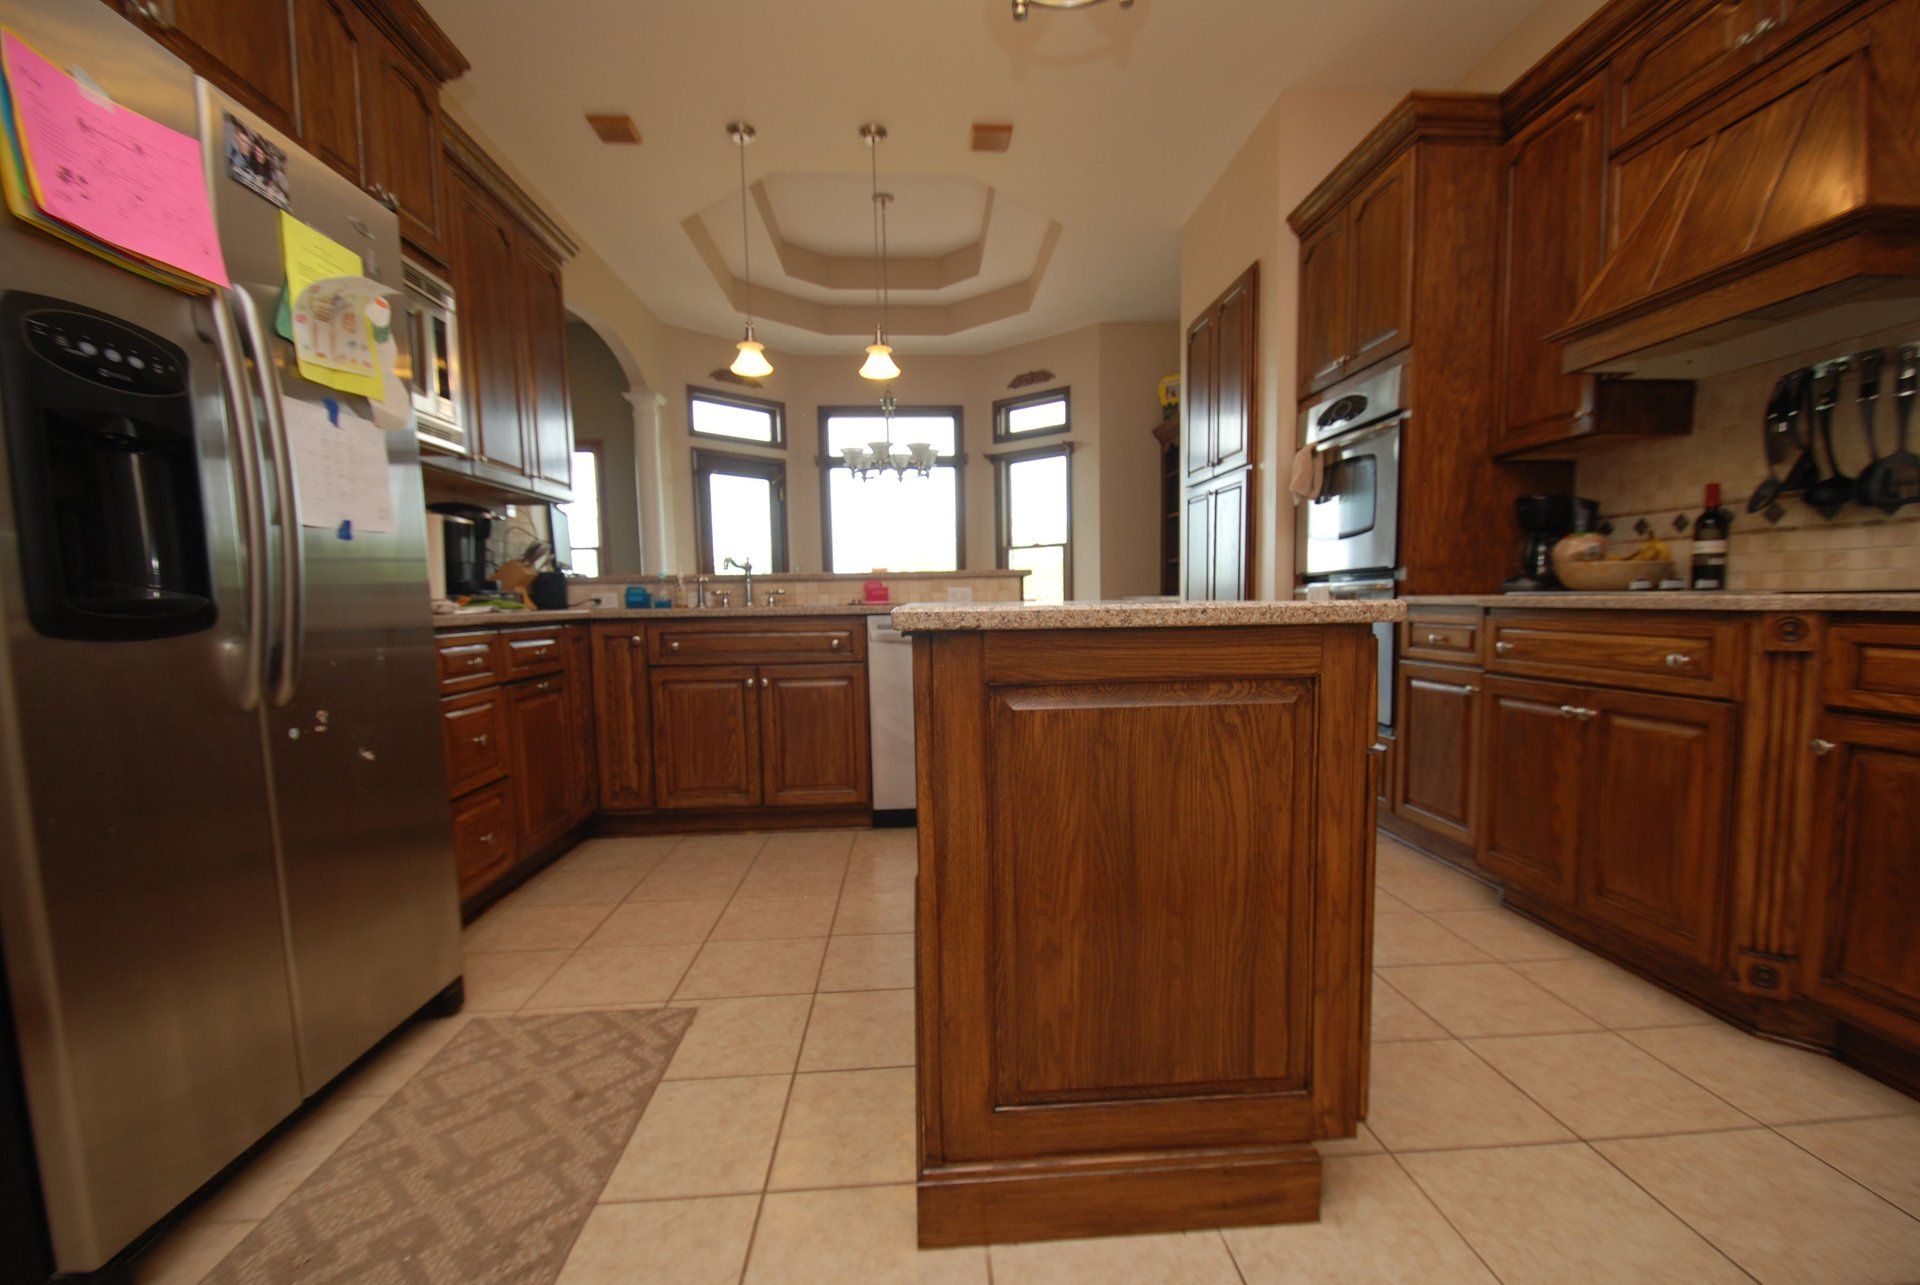 Agoura Hills walnut stained cabinets